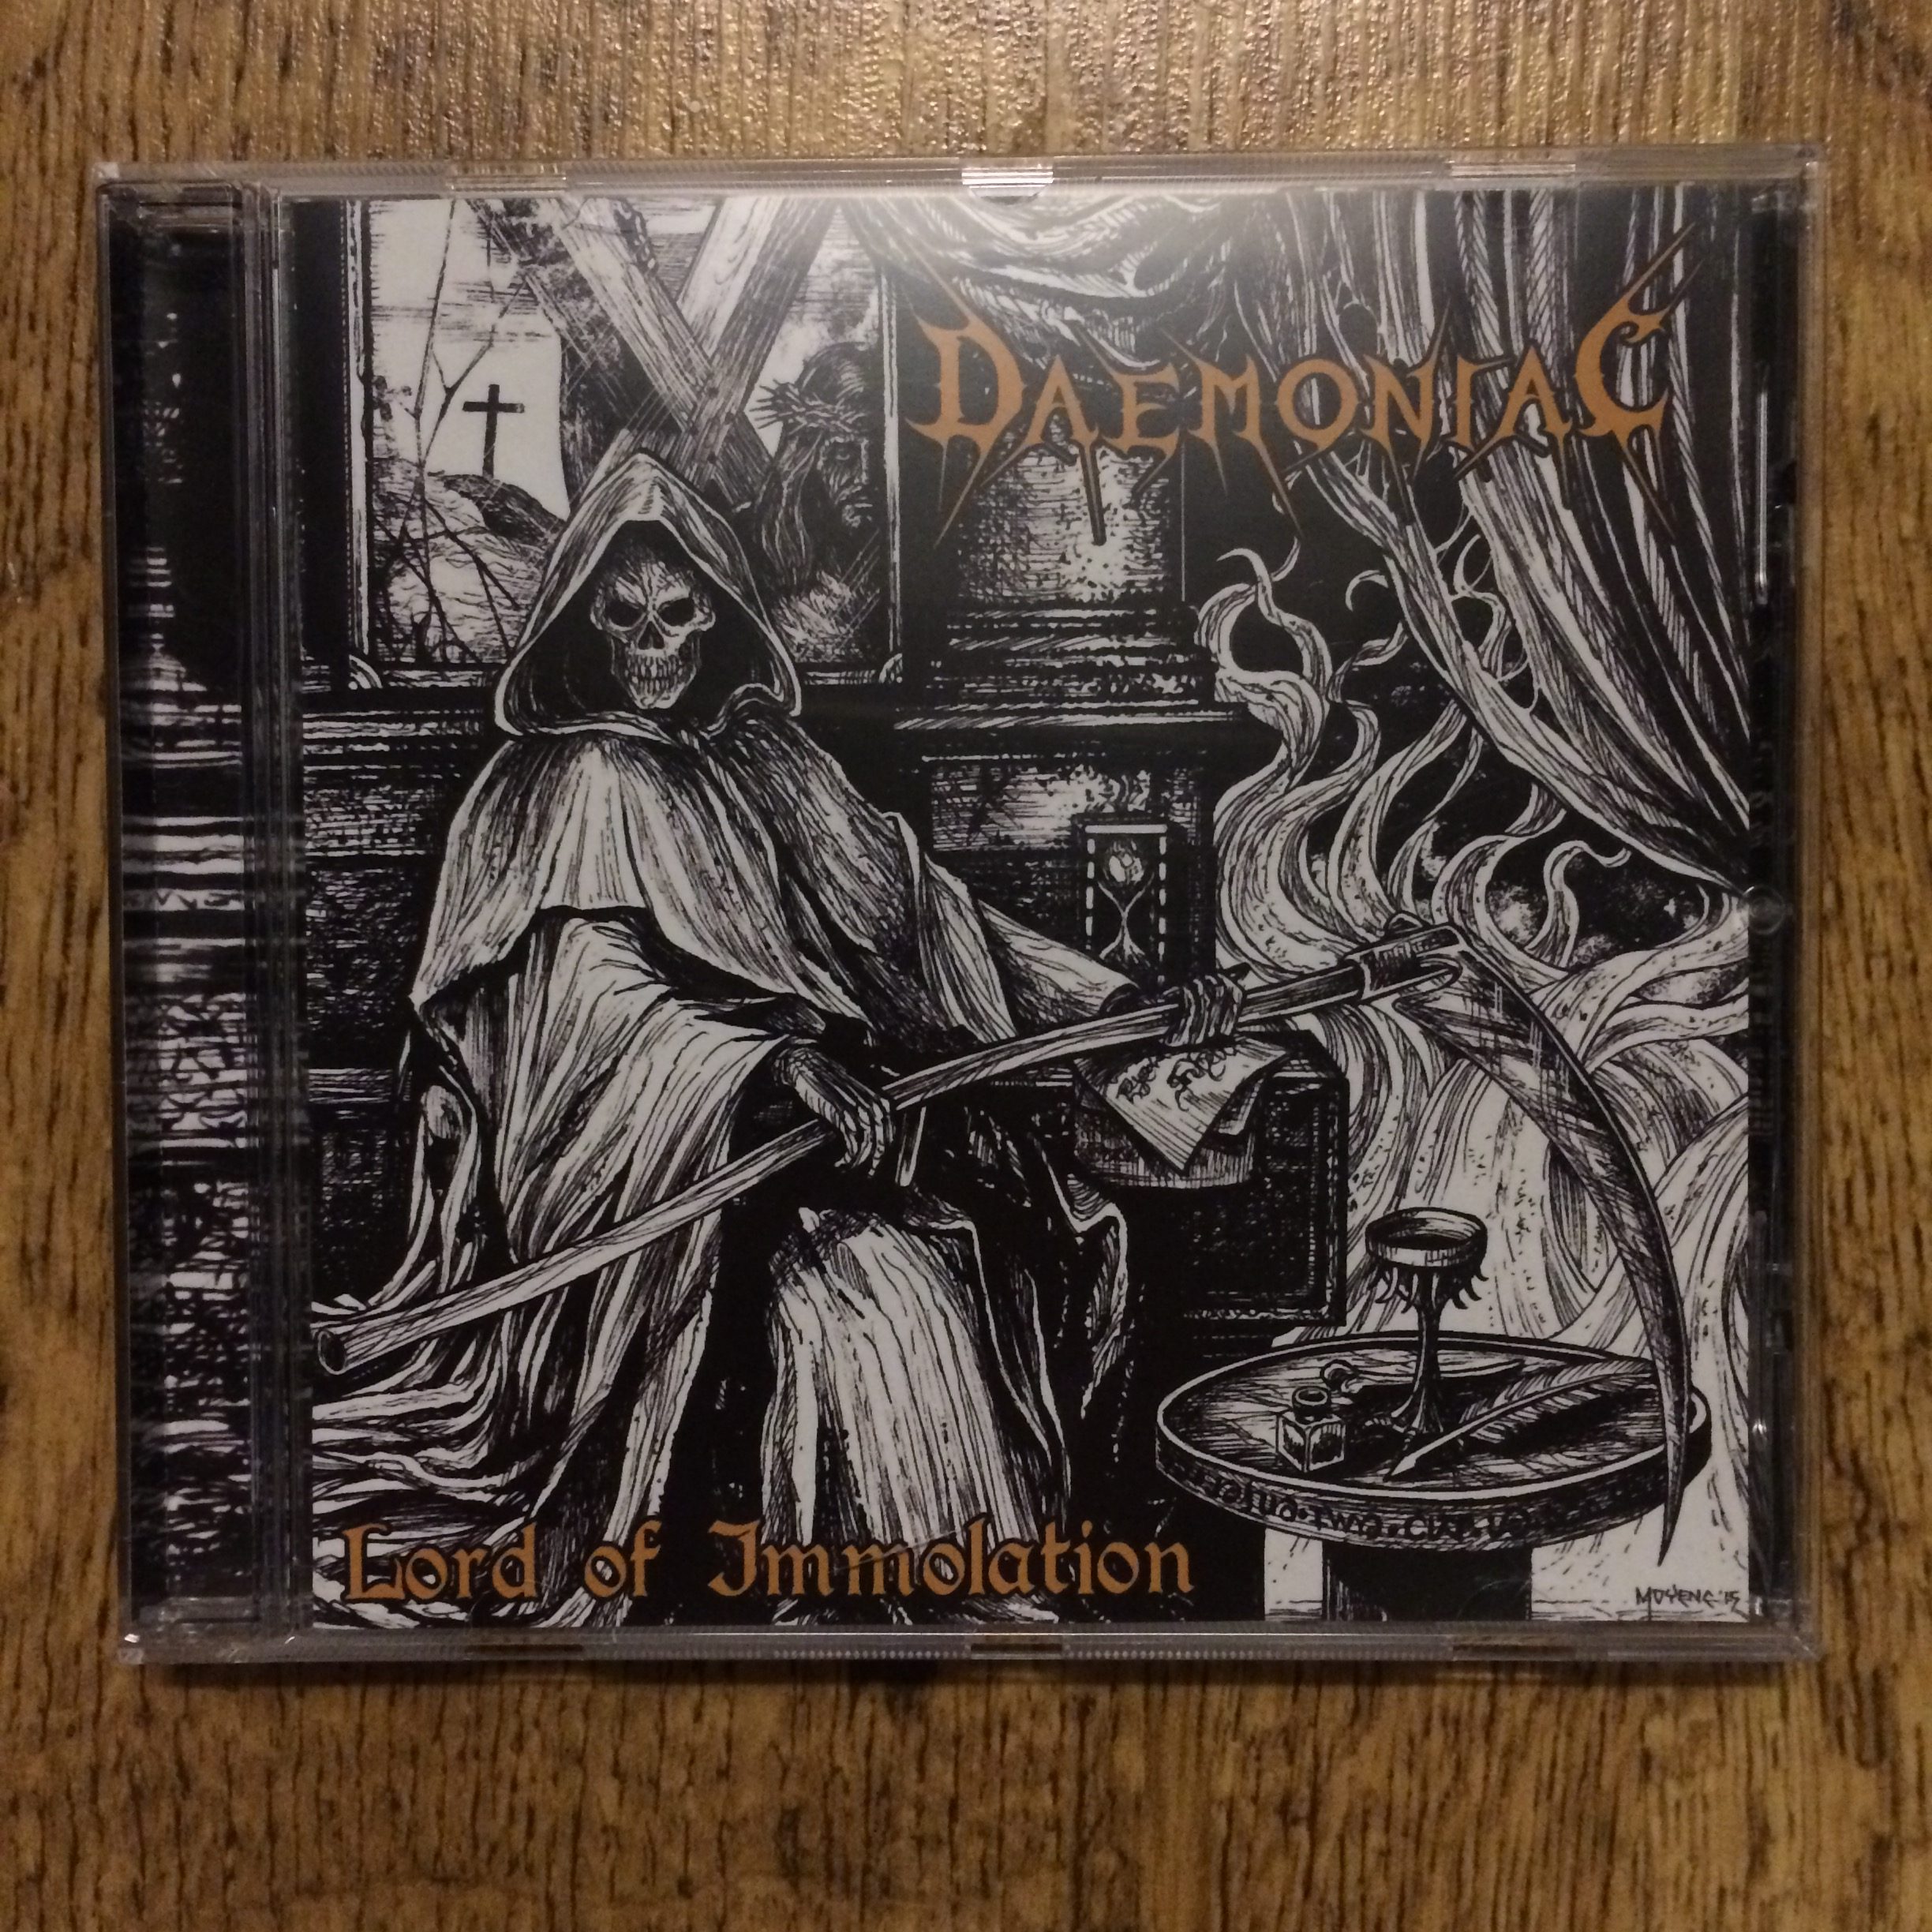 Photo of the Daemoniac - "Lord of Immolation" CD